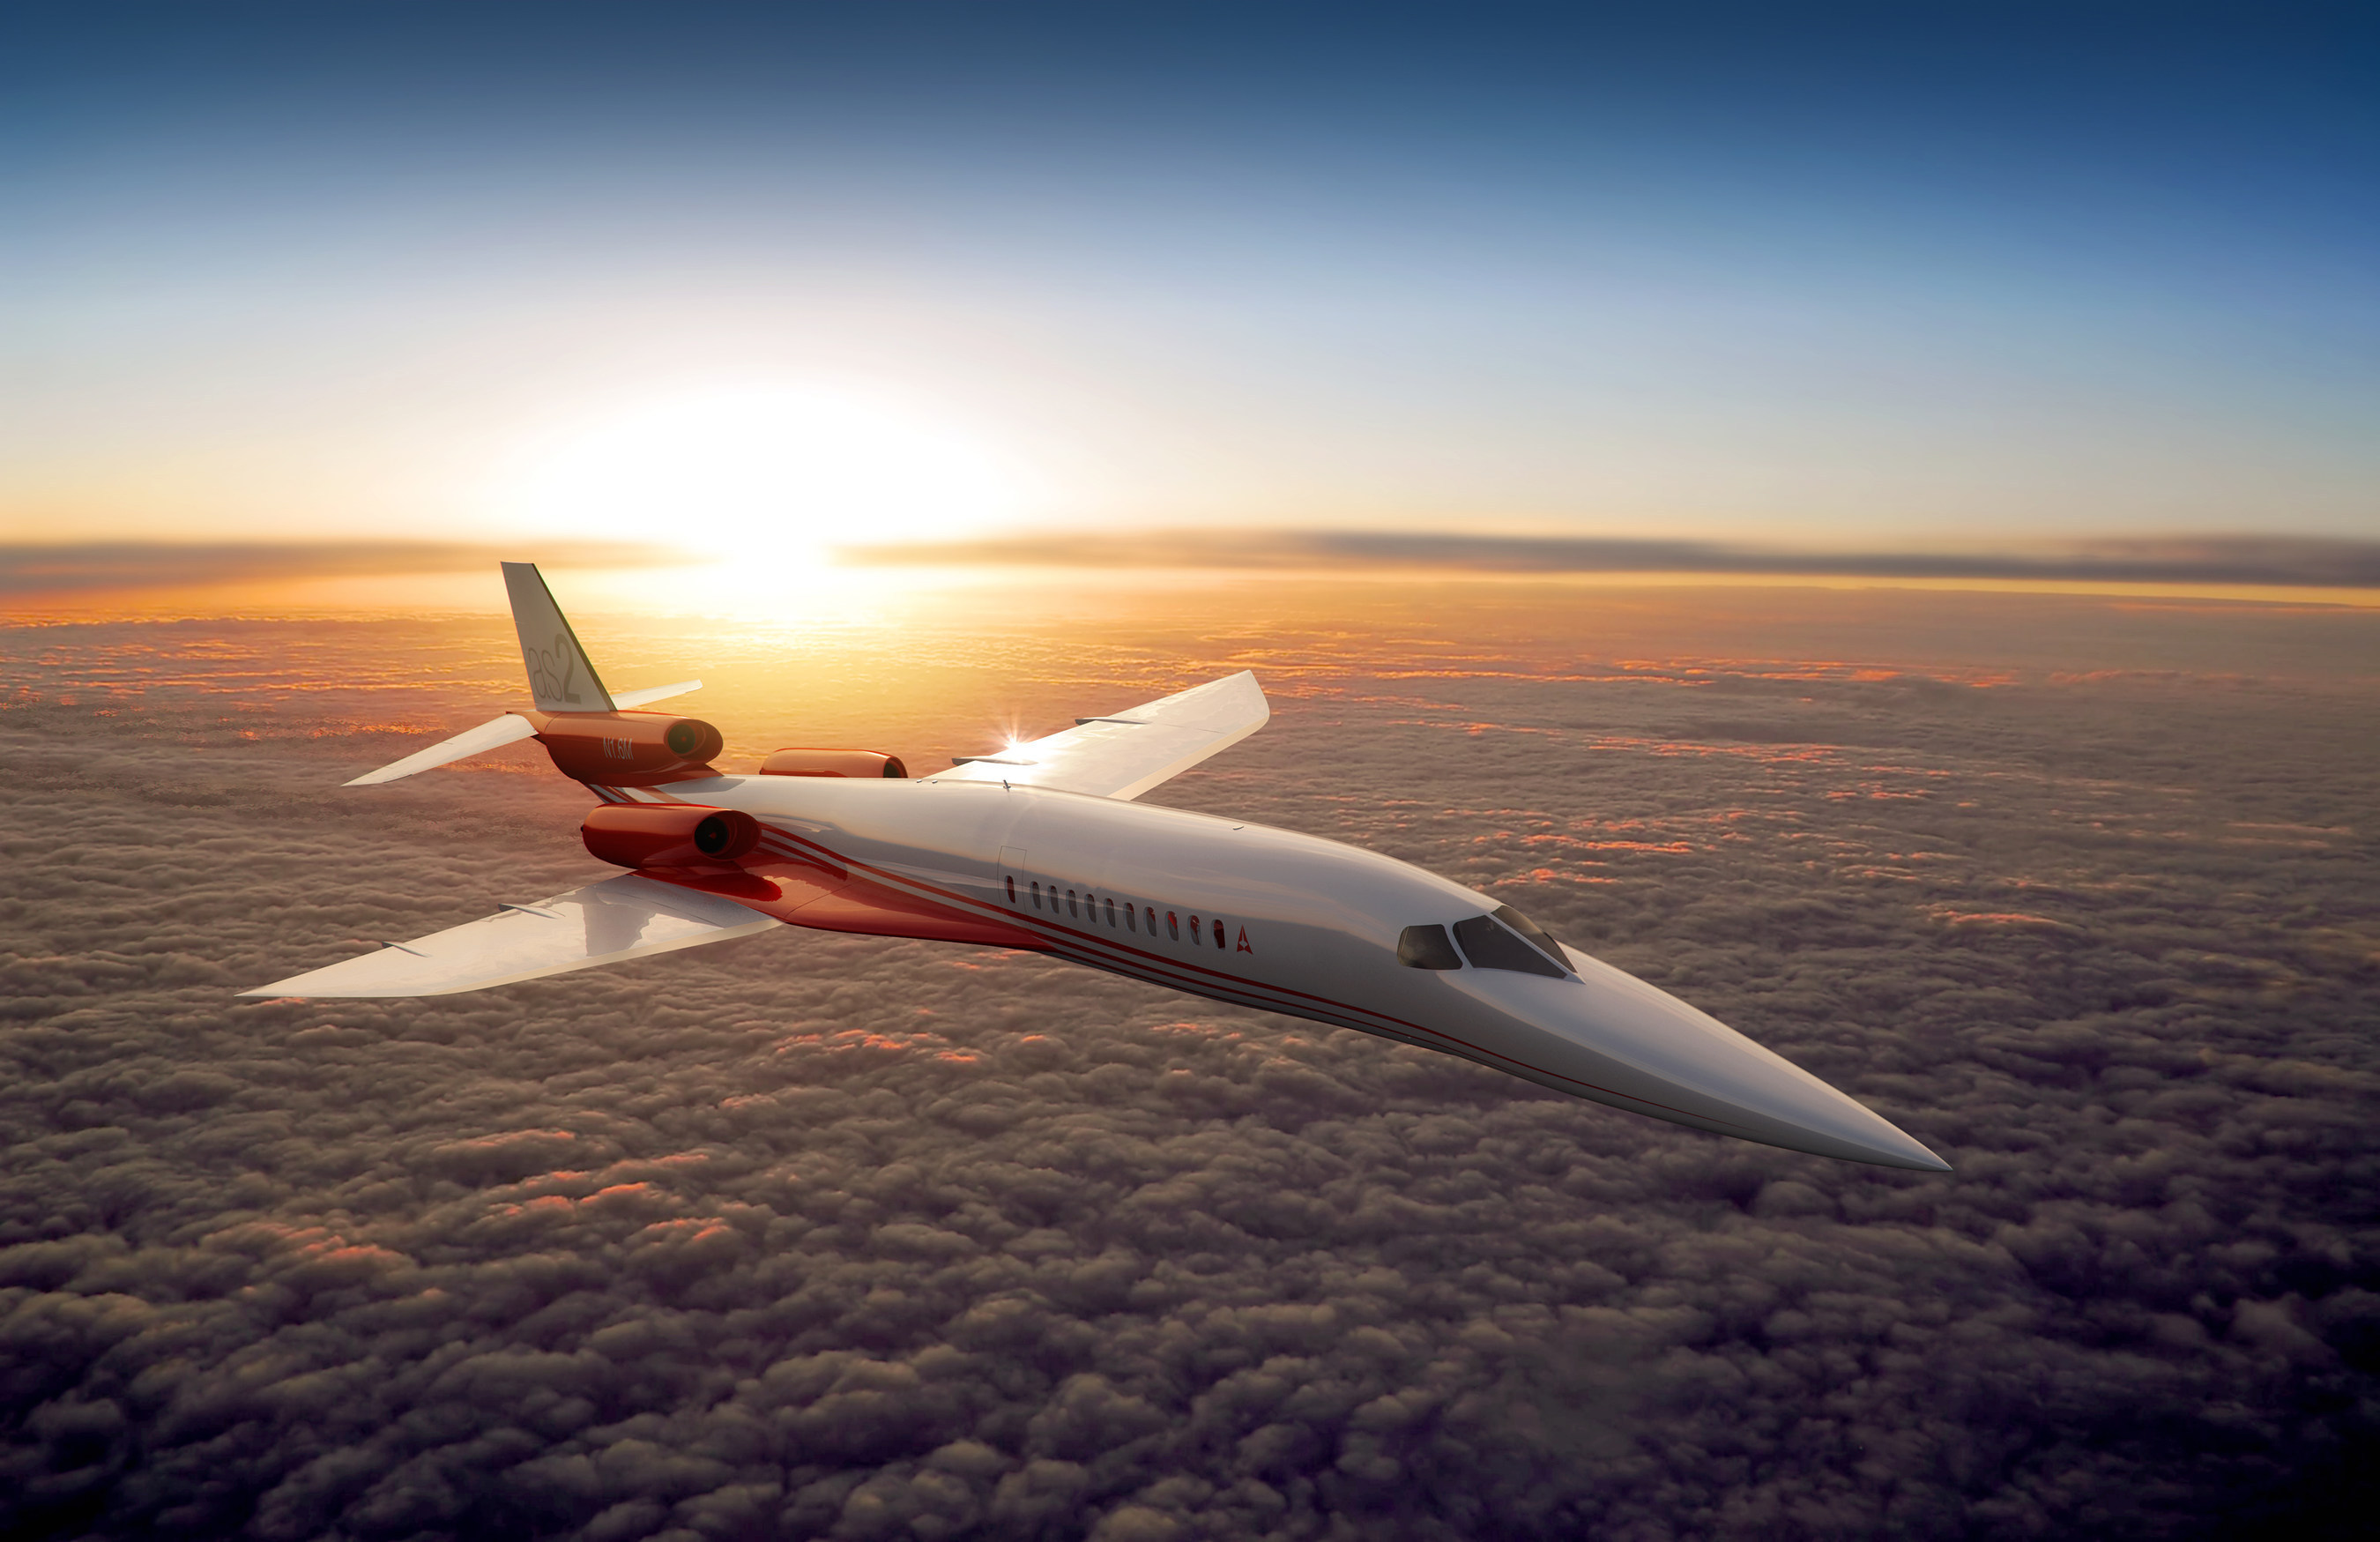 Certification of the Aerion AS2 Mach 1.6 supersonic business jet is planned for 2021. (PRNewsFoto/Aerion Corporation) (PRNewsFoto/Aerion Corporation)